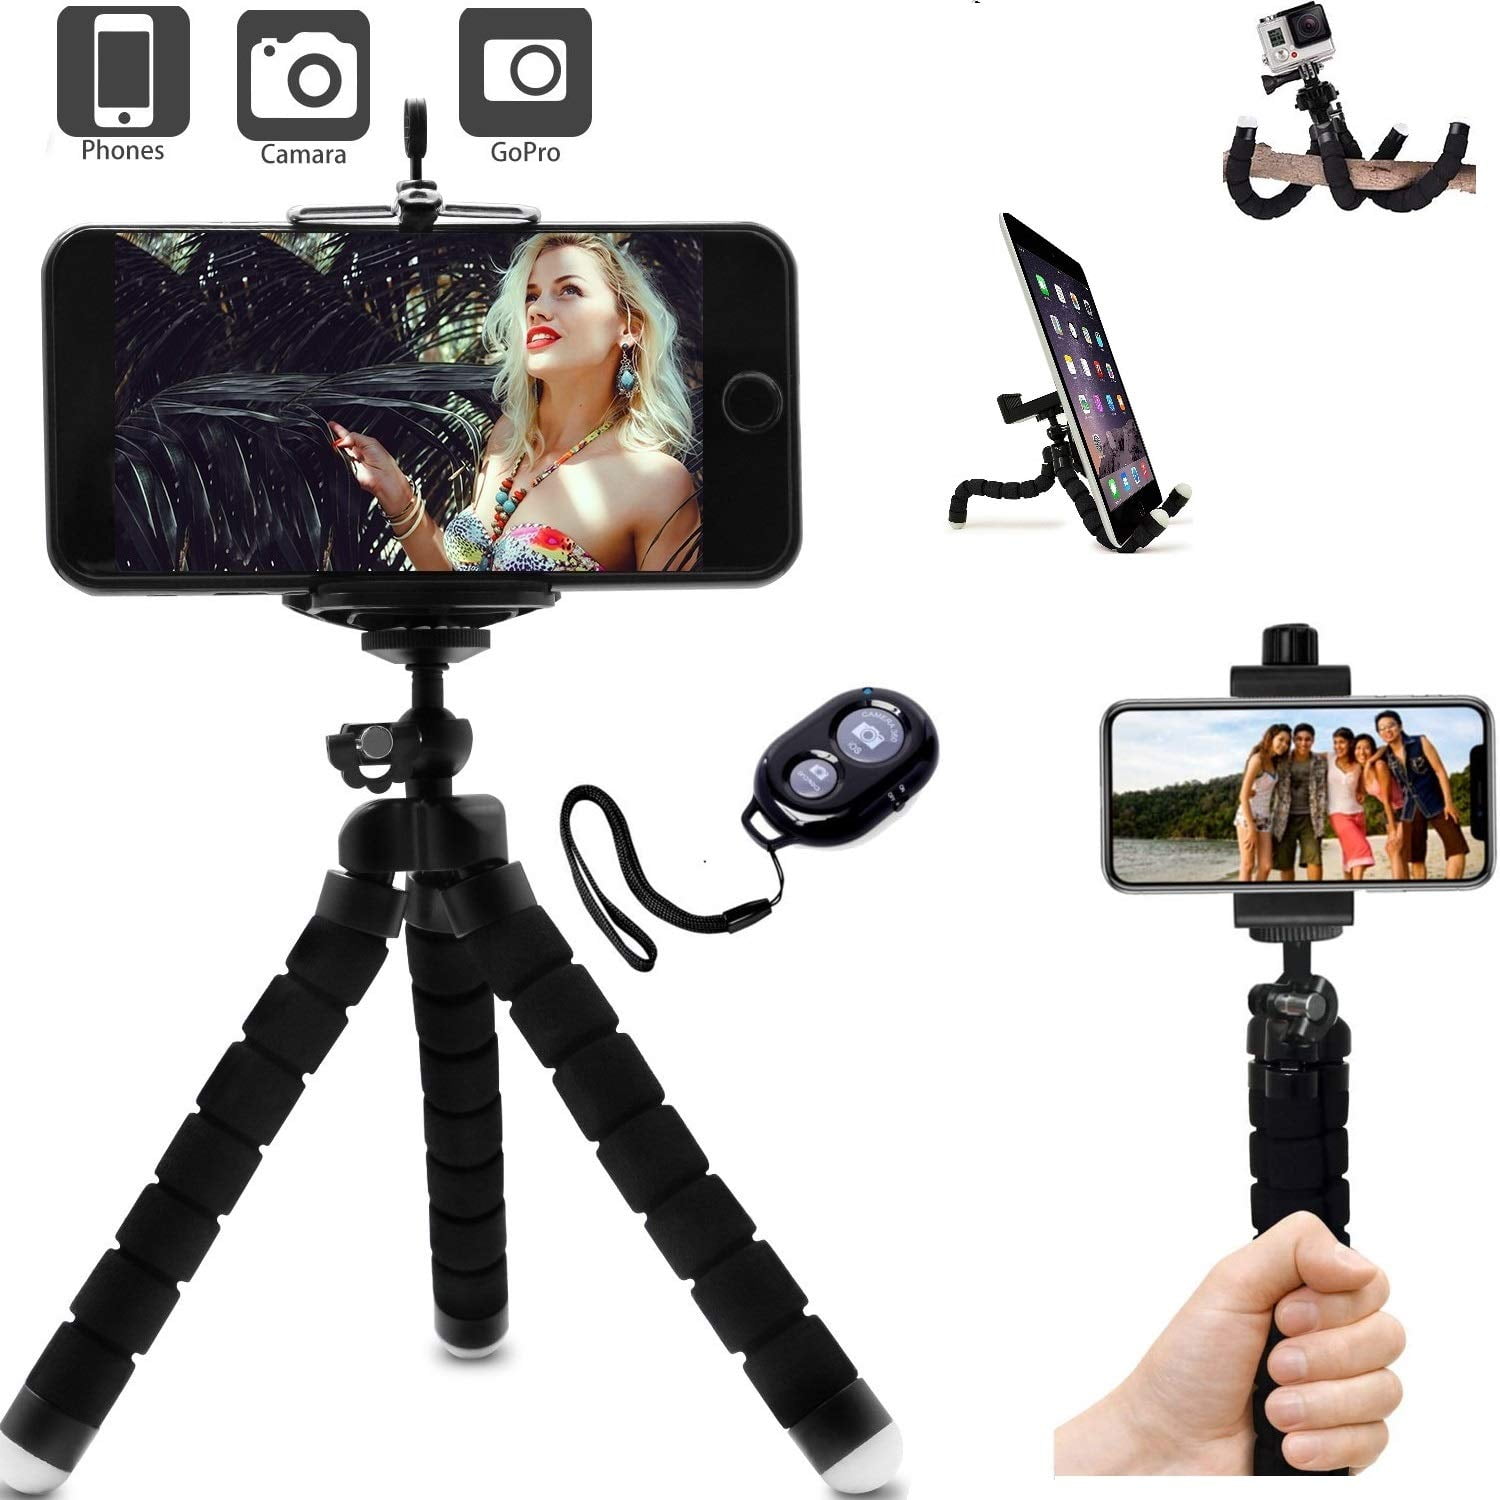 MT-30 Extendable Cell Phone Selfie Stick Tripod with Remote Shutter Flexible Phone Holder Cold Shoe Plate Lightweight Portable Small Tripod Stand Phone Camera Mini Tripod for Vlogging 